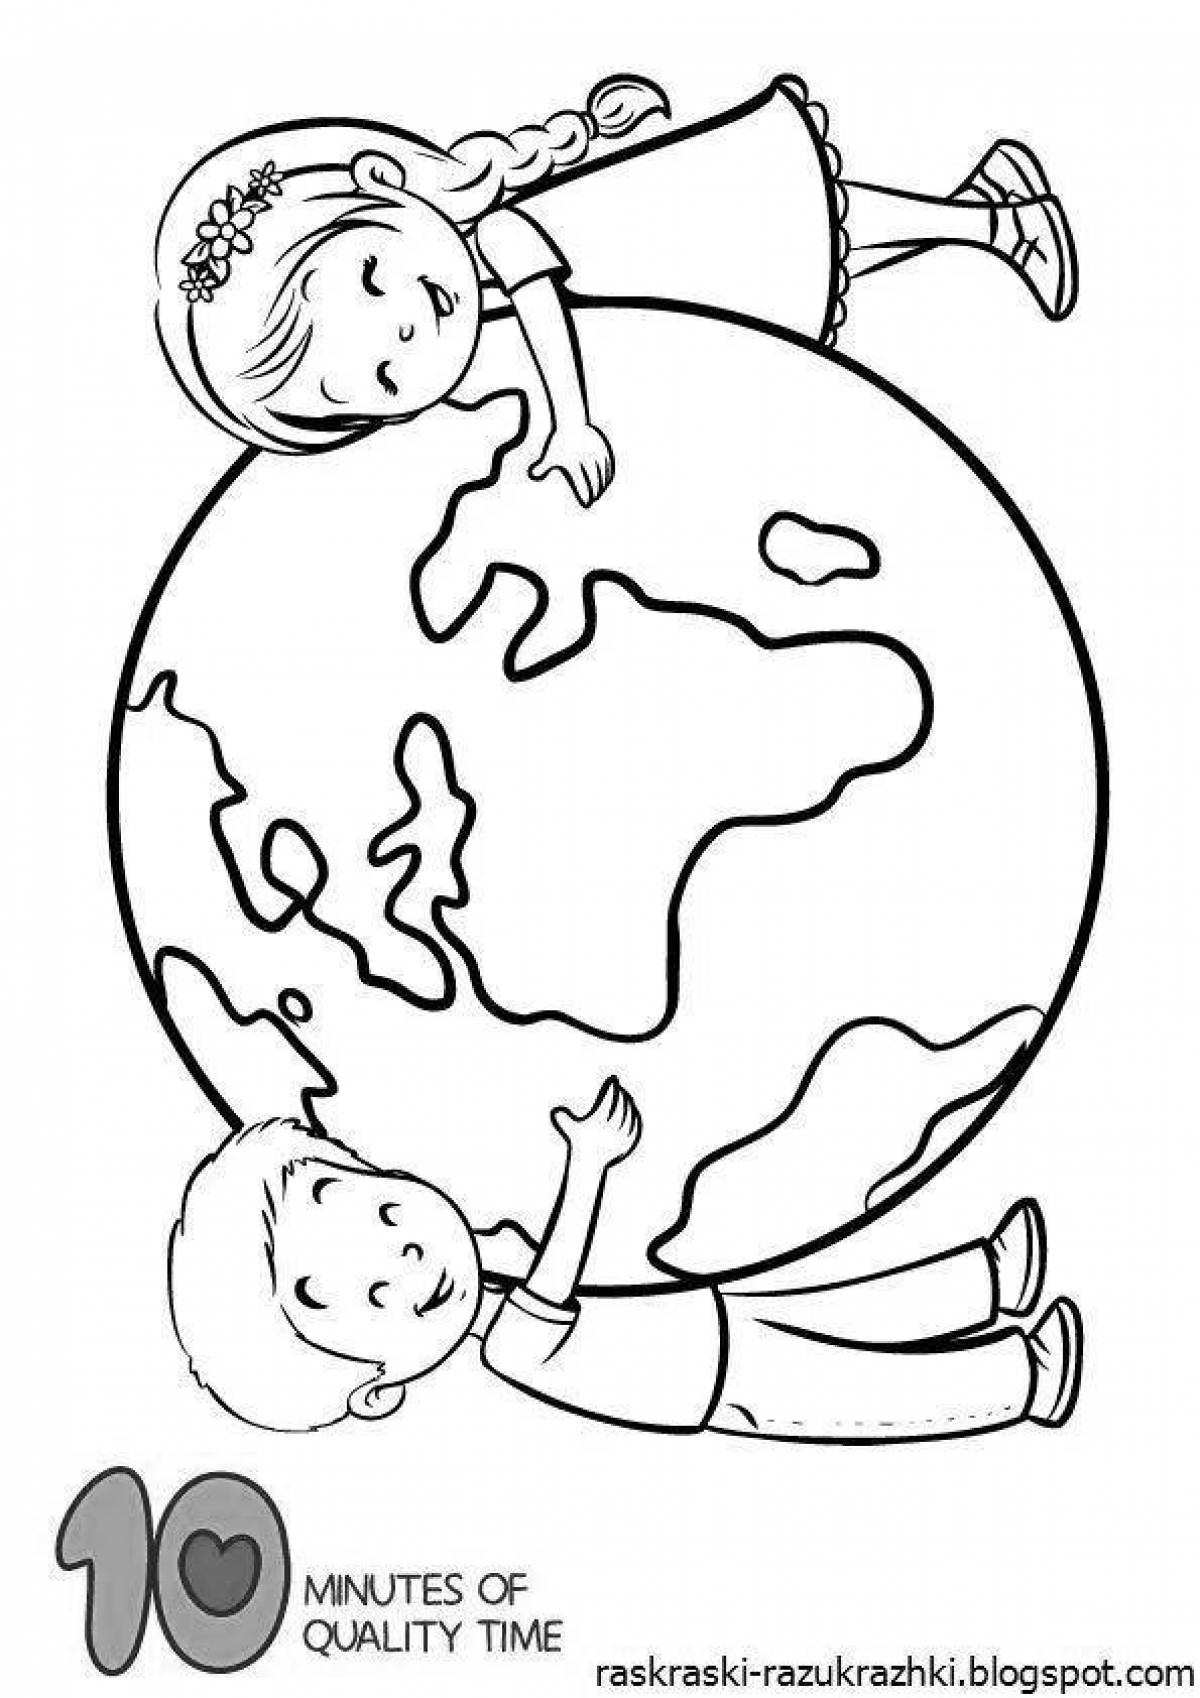 Majestic coloring page: the health of our planet is in our hands